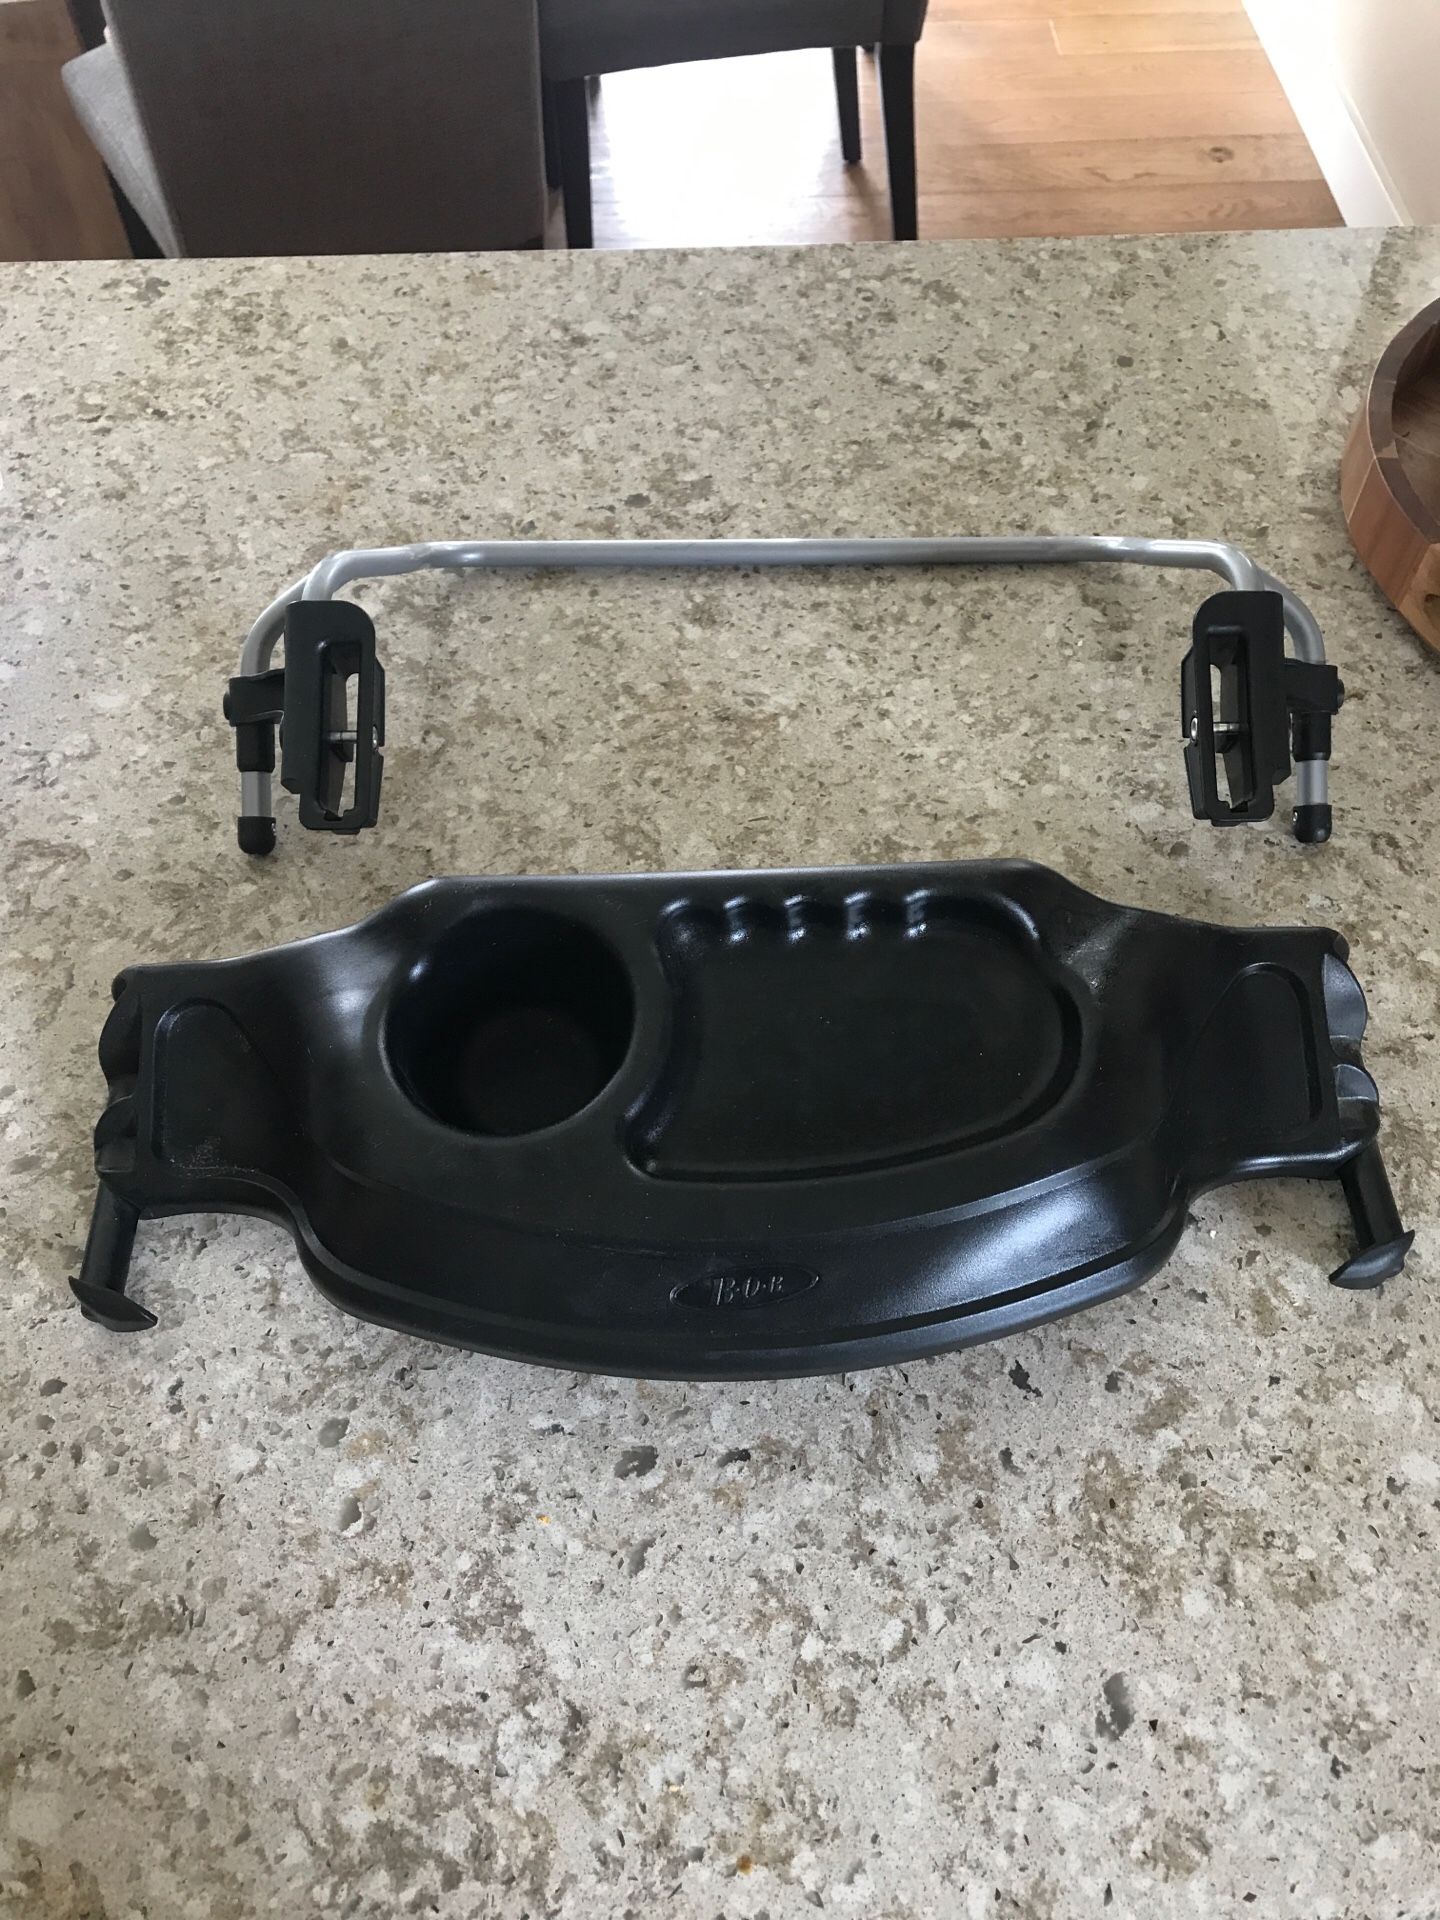 Bob stroller britax adapter with snack tray